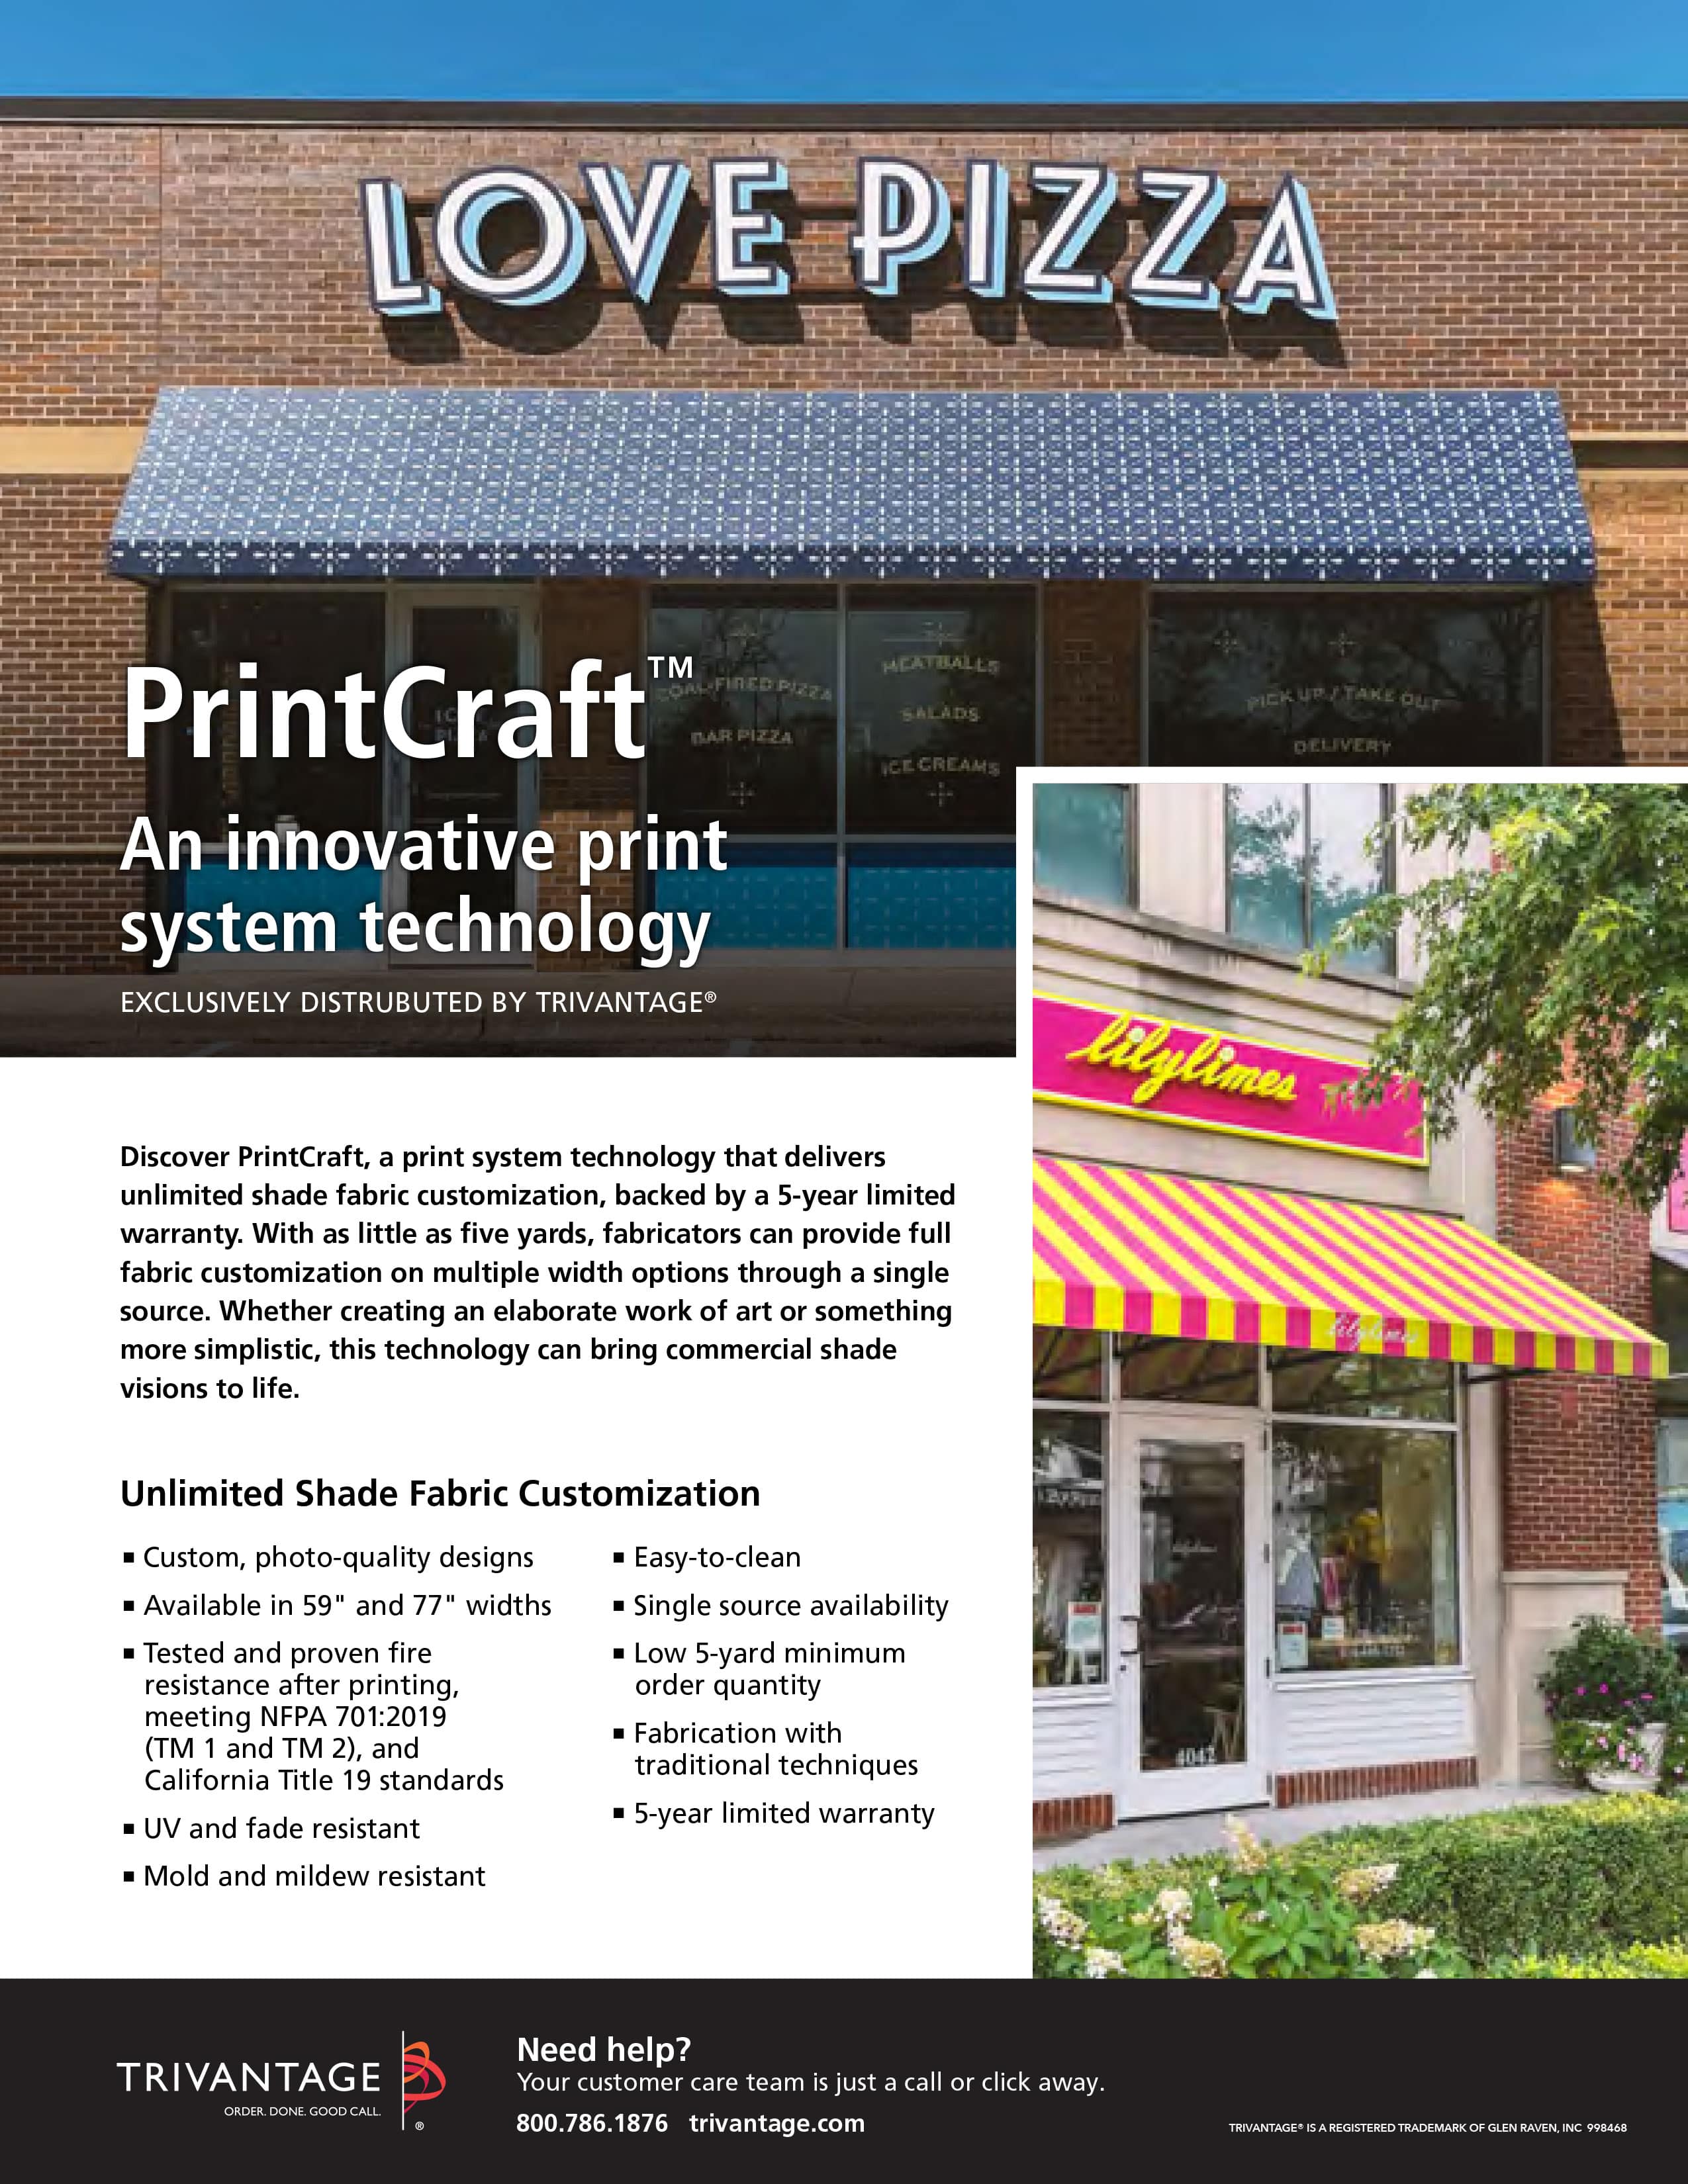 Visual guide illustrating the Printcraft system technology